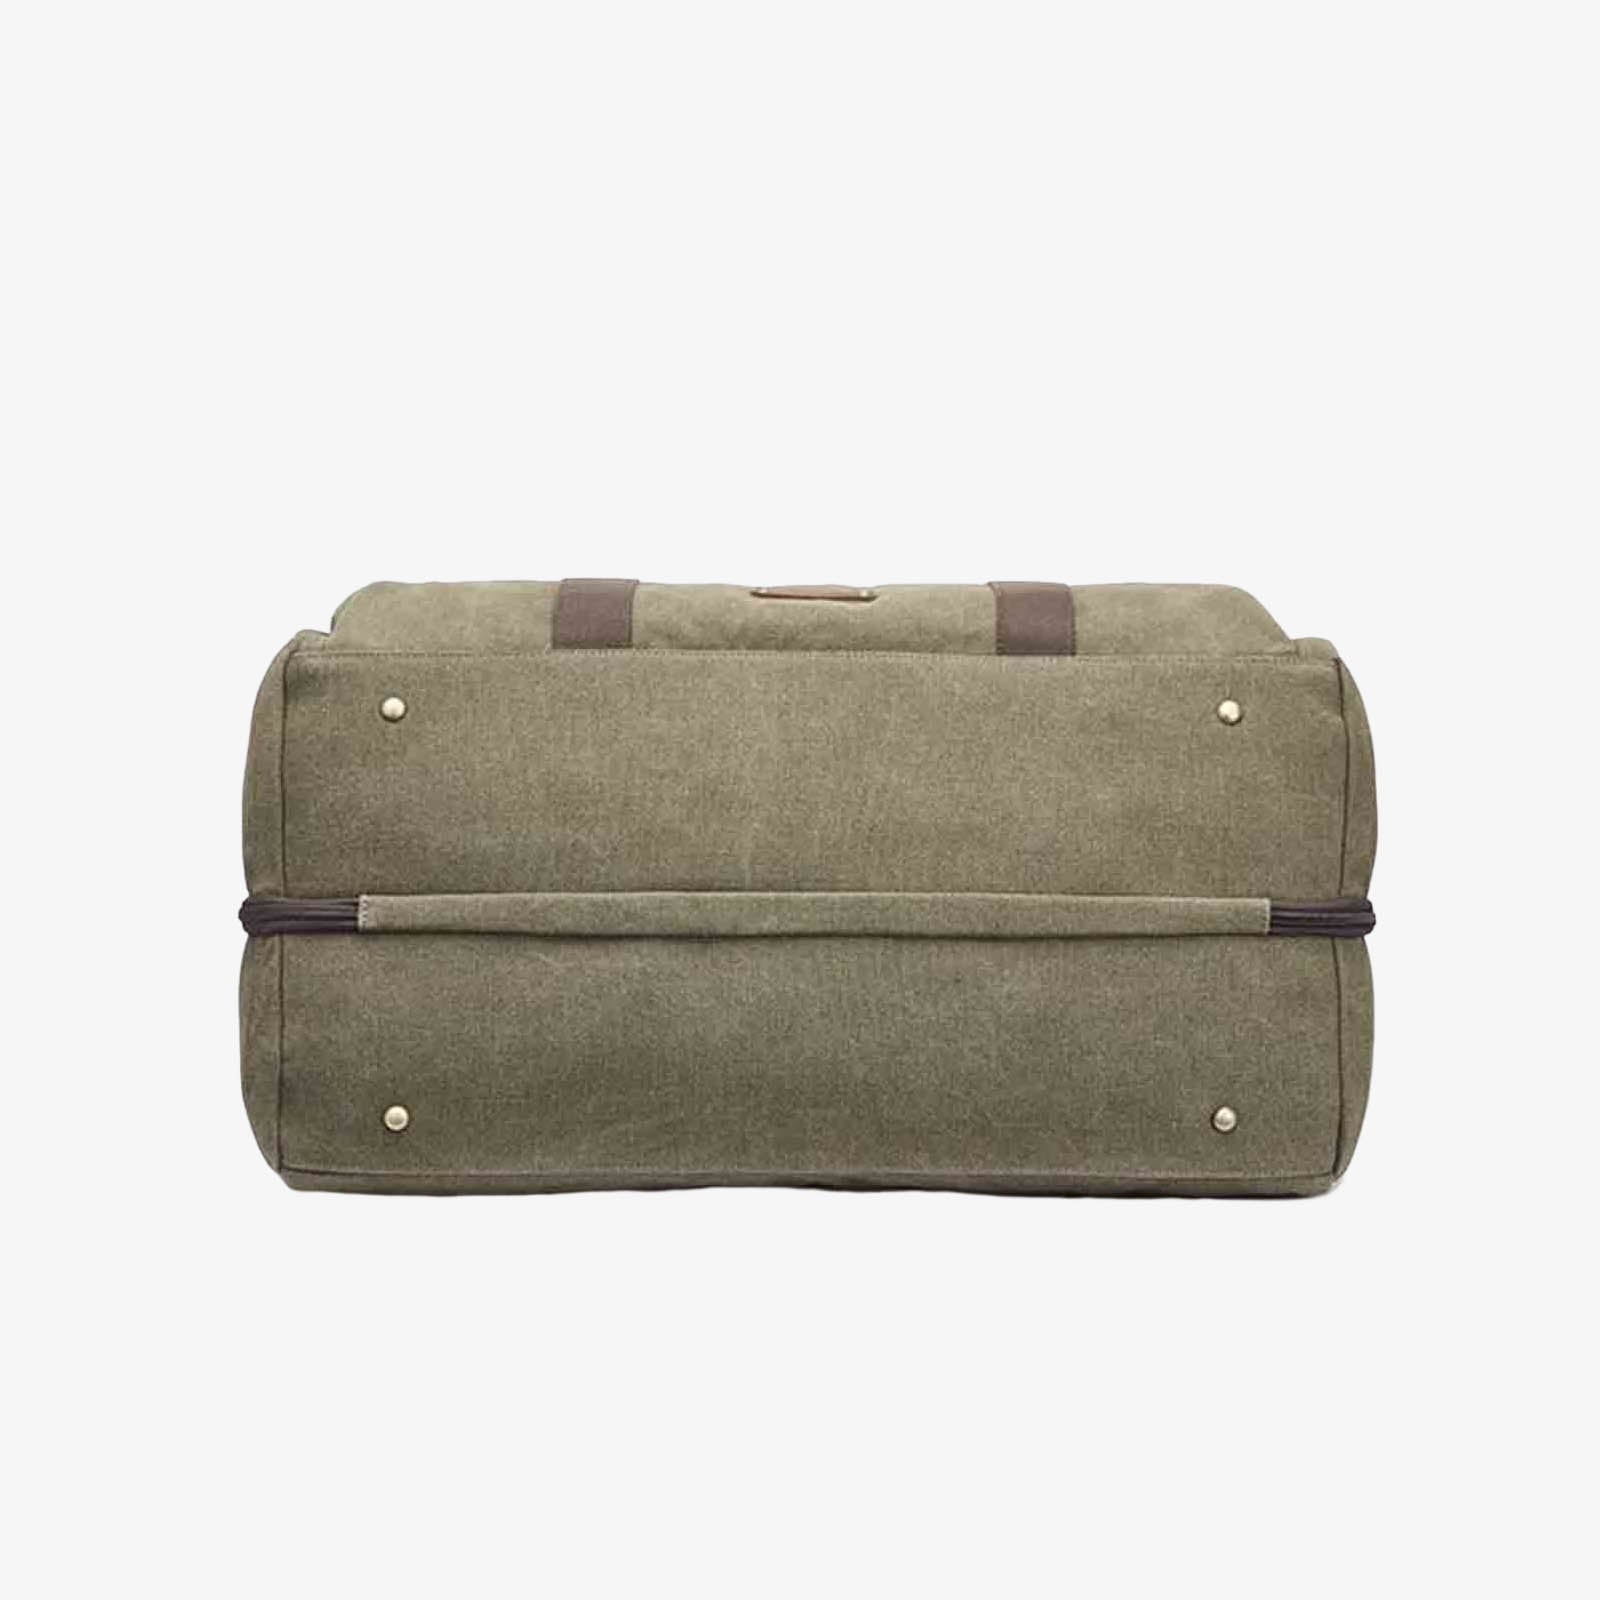 52L Canvas Carry on RFID Blocking Duffle Bag